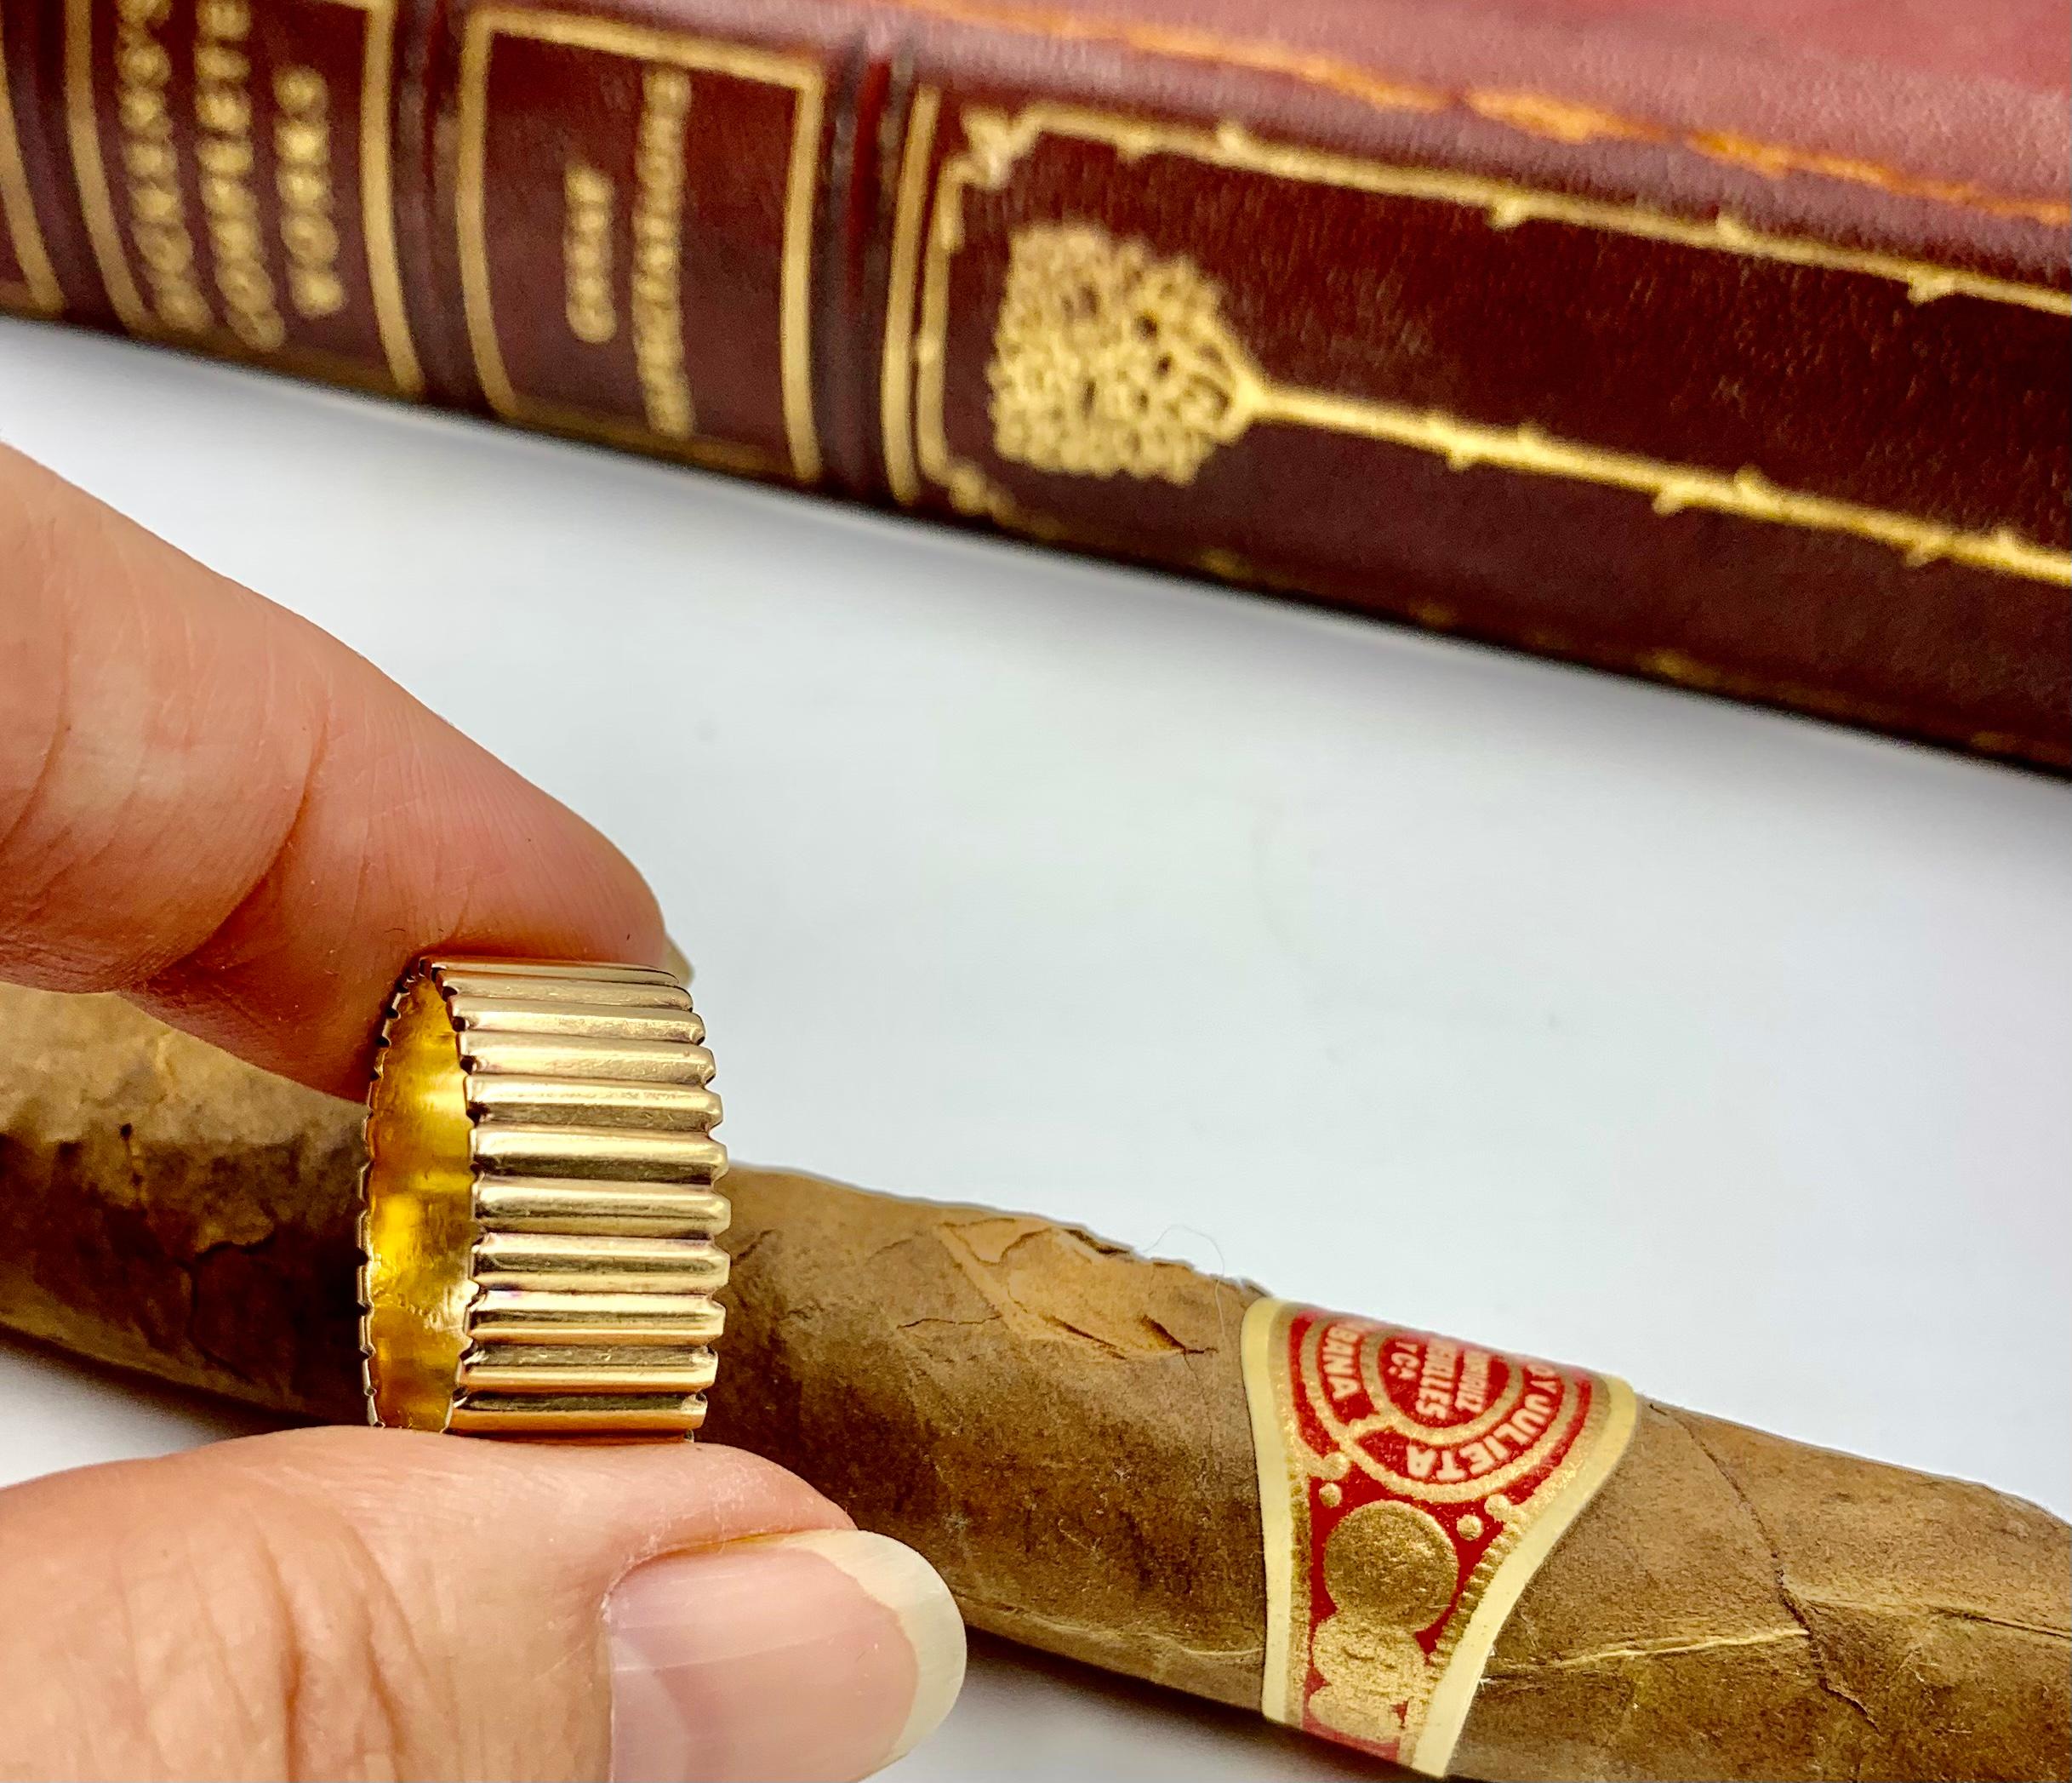 Beautiful MCM cigar band ring, substantial quality, wide reed design reminiscent of a circle band of cigars.
Very good condition, lovely patina.
Marks: 14K
Width of band 9.5mm
Size 6US